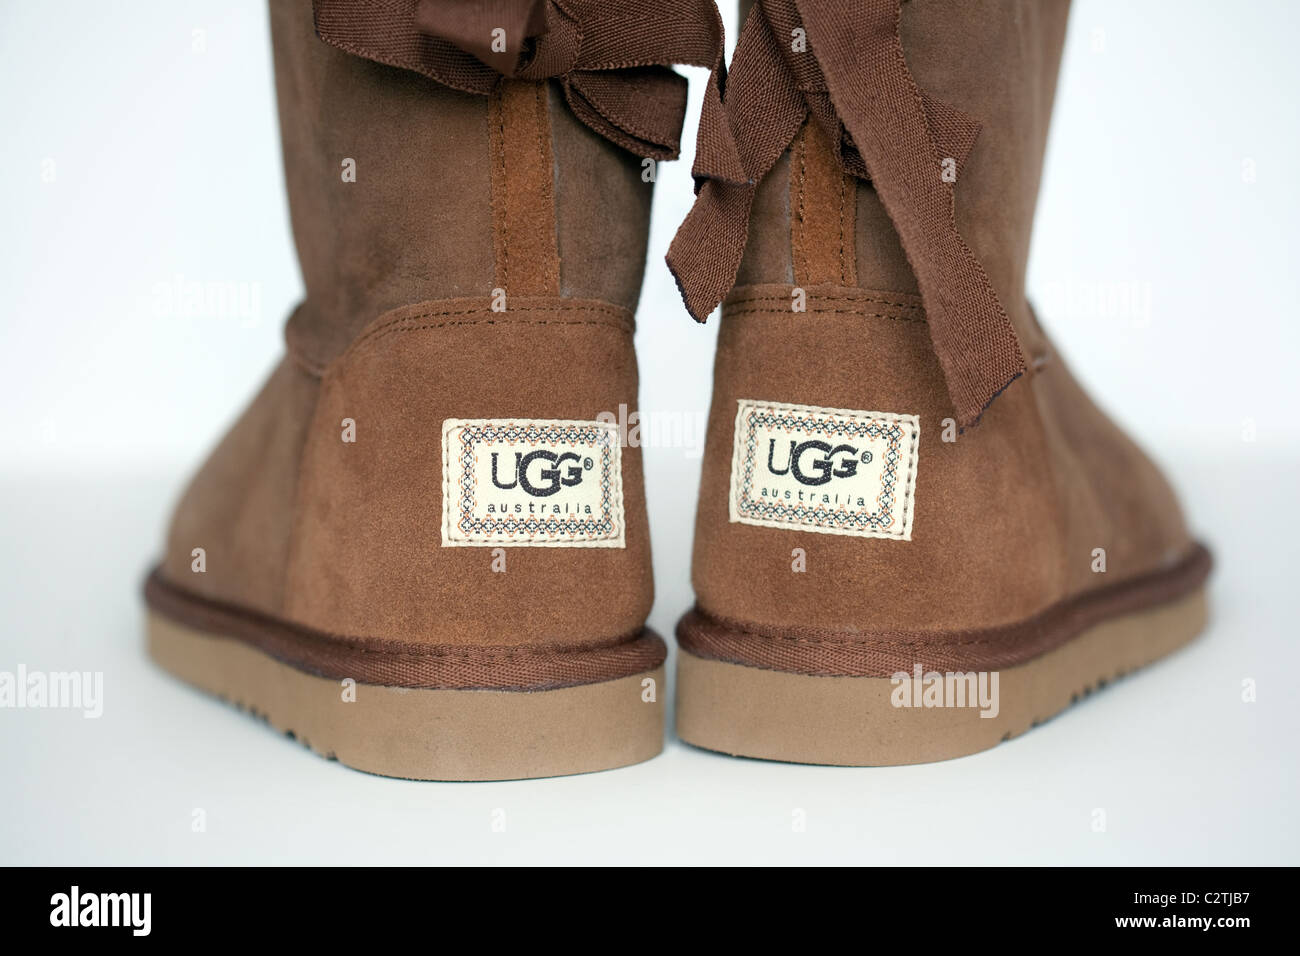 what are ugg boots really made of